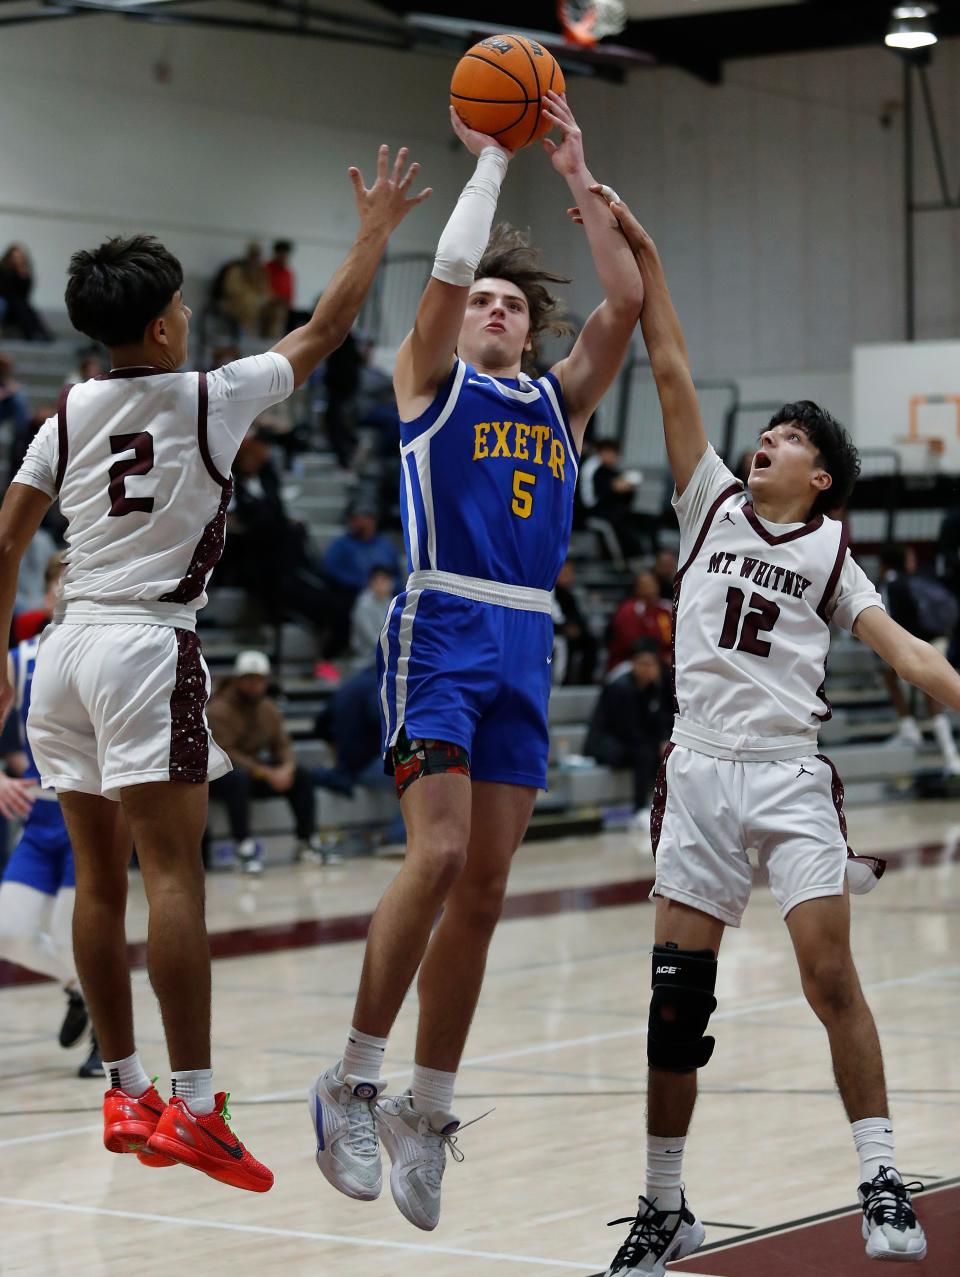 Exeter's Blaine McFall looks to score against Mt. Whitney's Xavery Soto, right, during their 72nd annual Polly Wilhelmsen Invitational Basketball Tournament game in Visalia, Calif., Wednesday, Dec. 27, 2023.